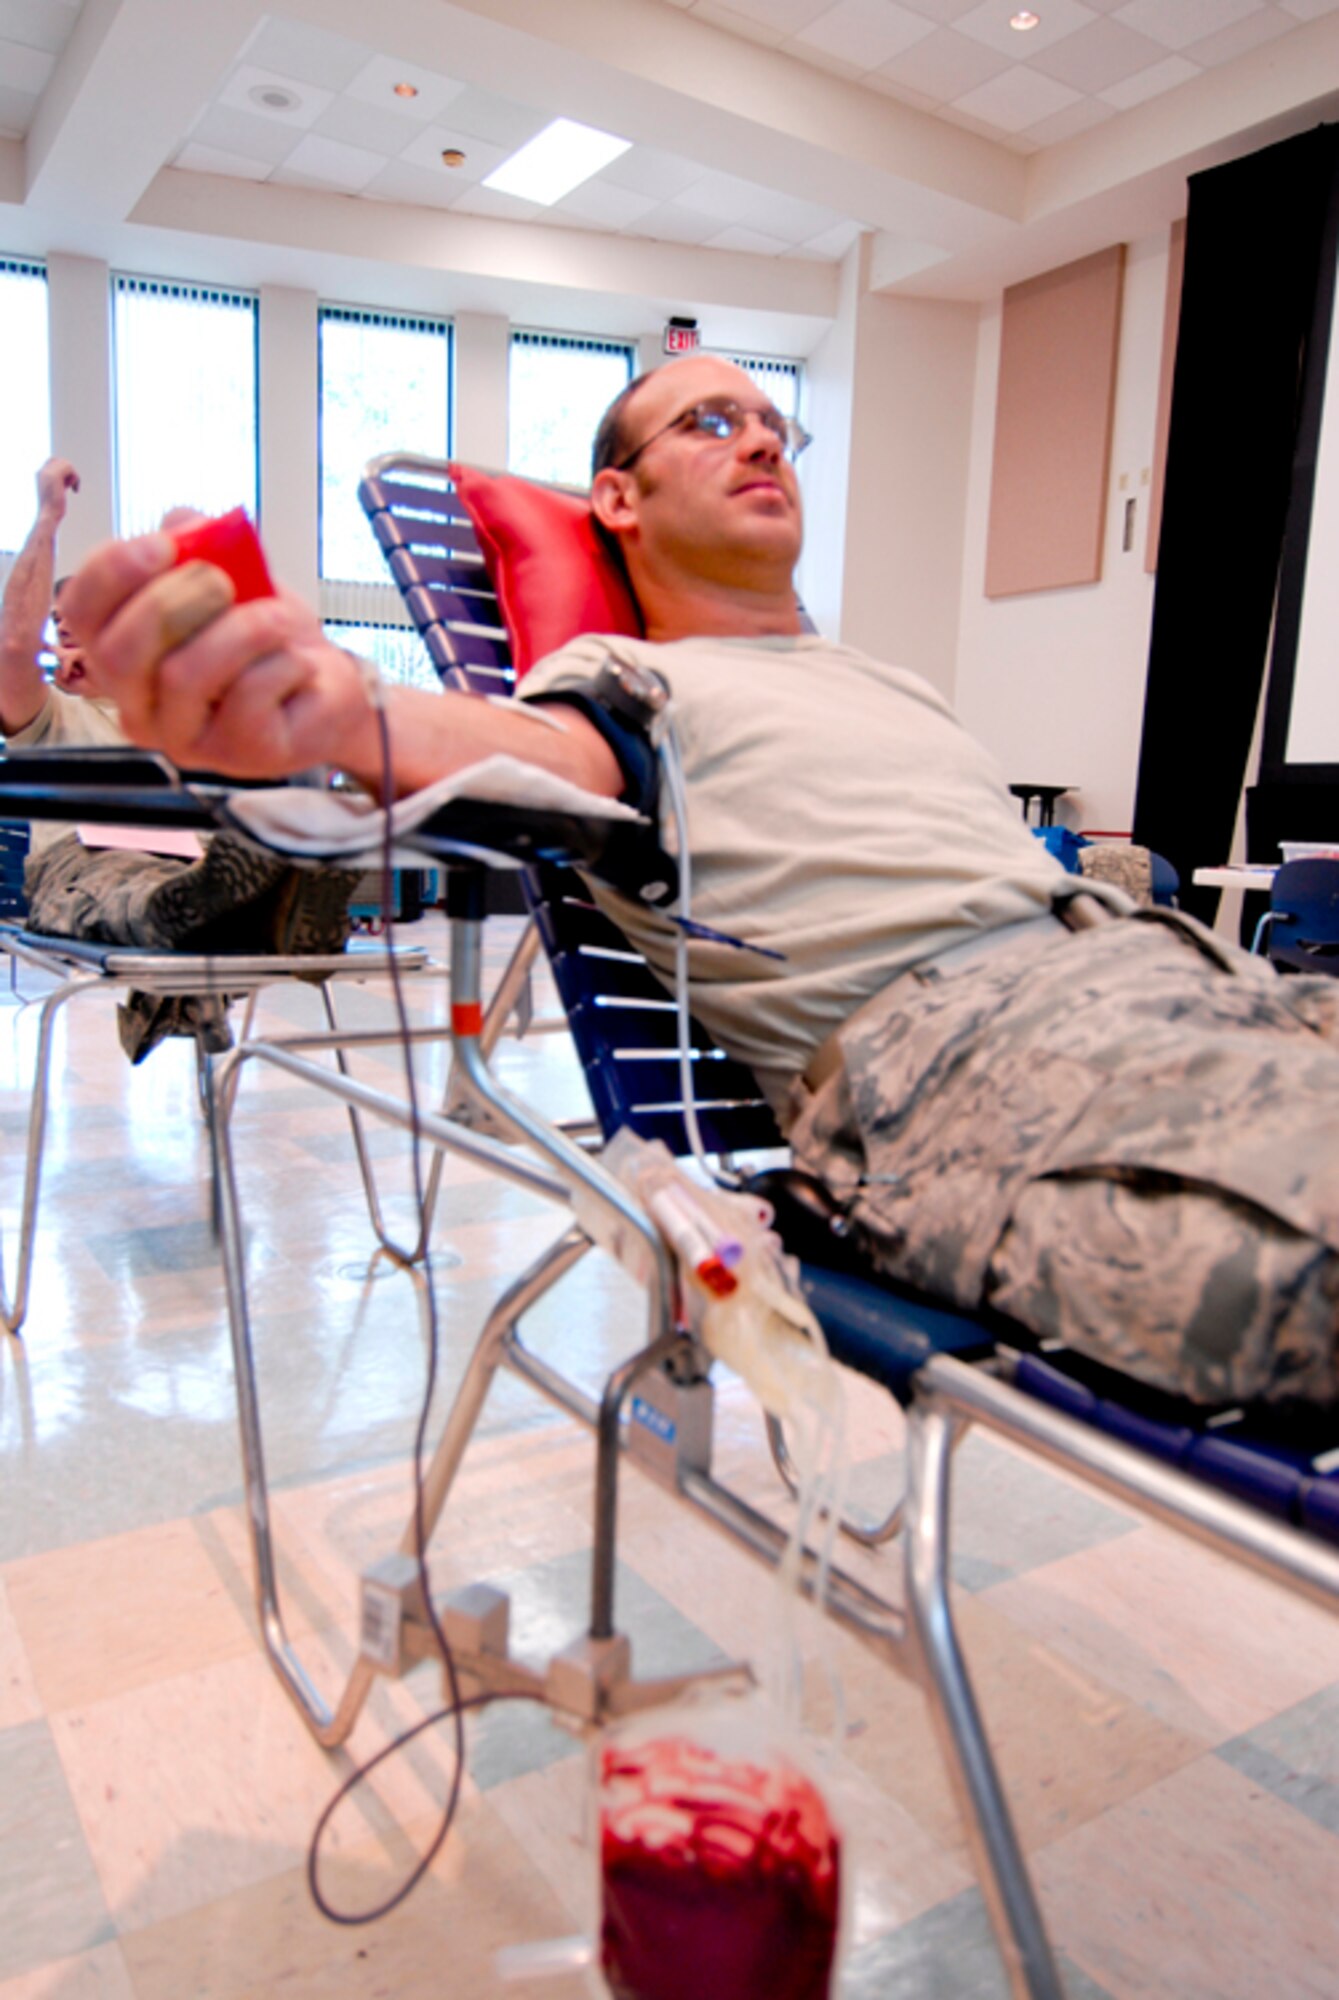 Technical Sgt. James Gerschutz, 180th Fighter Wing, donates blood at a Red Cross blood drive hosted at the 180th Fighter Wing, September 8. The 180th FW has been hosting blood drives for unit members since 2004. Throughout that time, 180th members have donated 438 units of blood. (U.S. Air Force Photo by Master Sgt. Beth Holliker/Released).